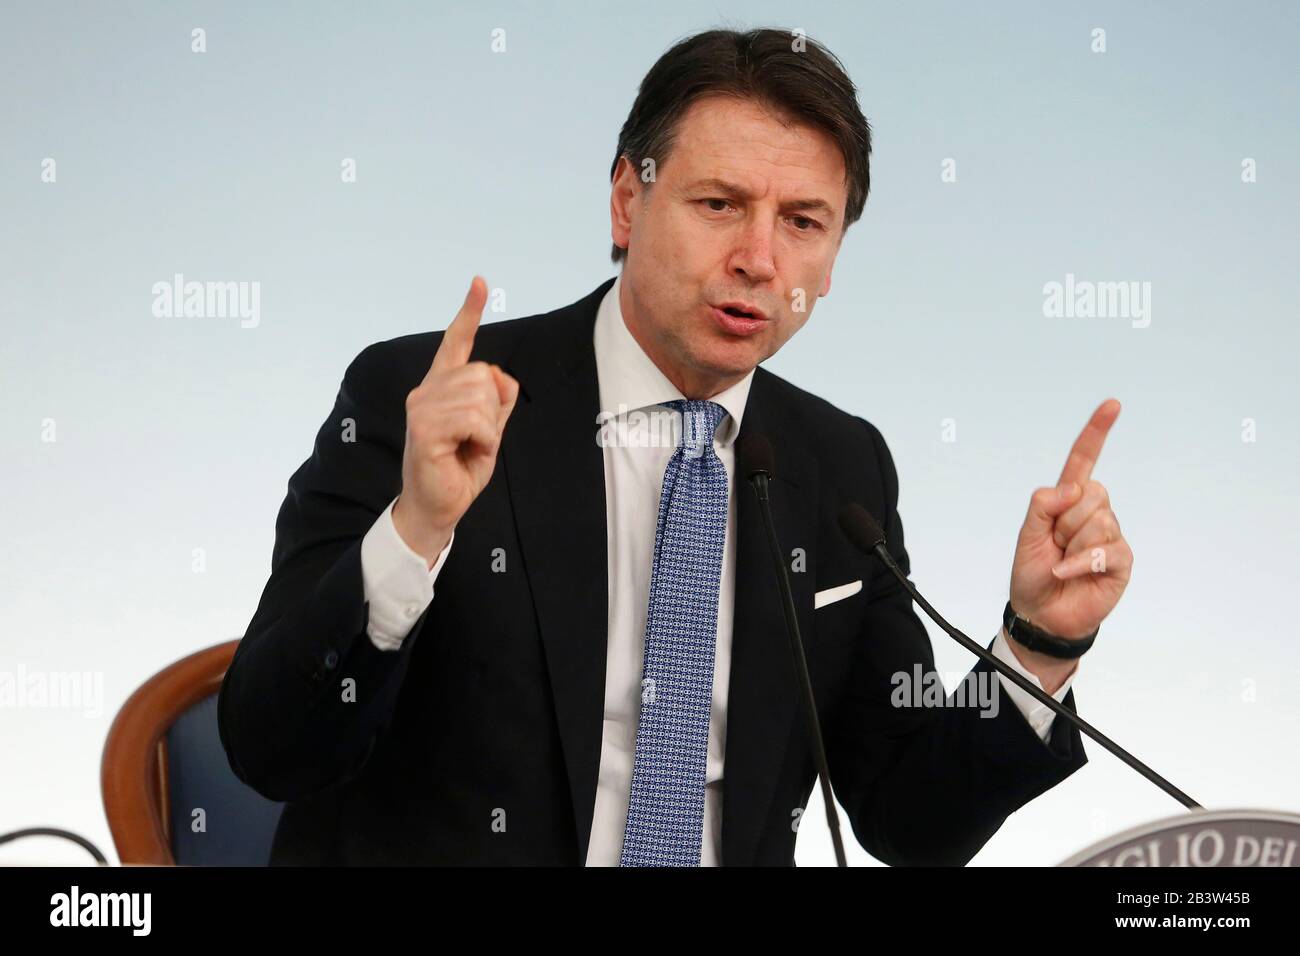 Roma, Italia. 05th Mar, 2020. Giuseppe Conte Rome March 5th 2020. Press conference at the end of the Italian Council of Ministers about the economic impact of Coronavirus (Covid-19) outbreak and about the measures the Government will take to face up the crisis. Photo Samantha Zucchi Insidefoto Credit: insidefoto srl/Alamy Live News Stock Photo